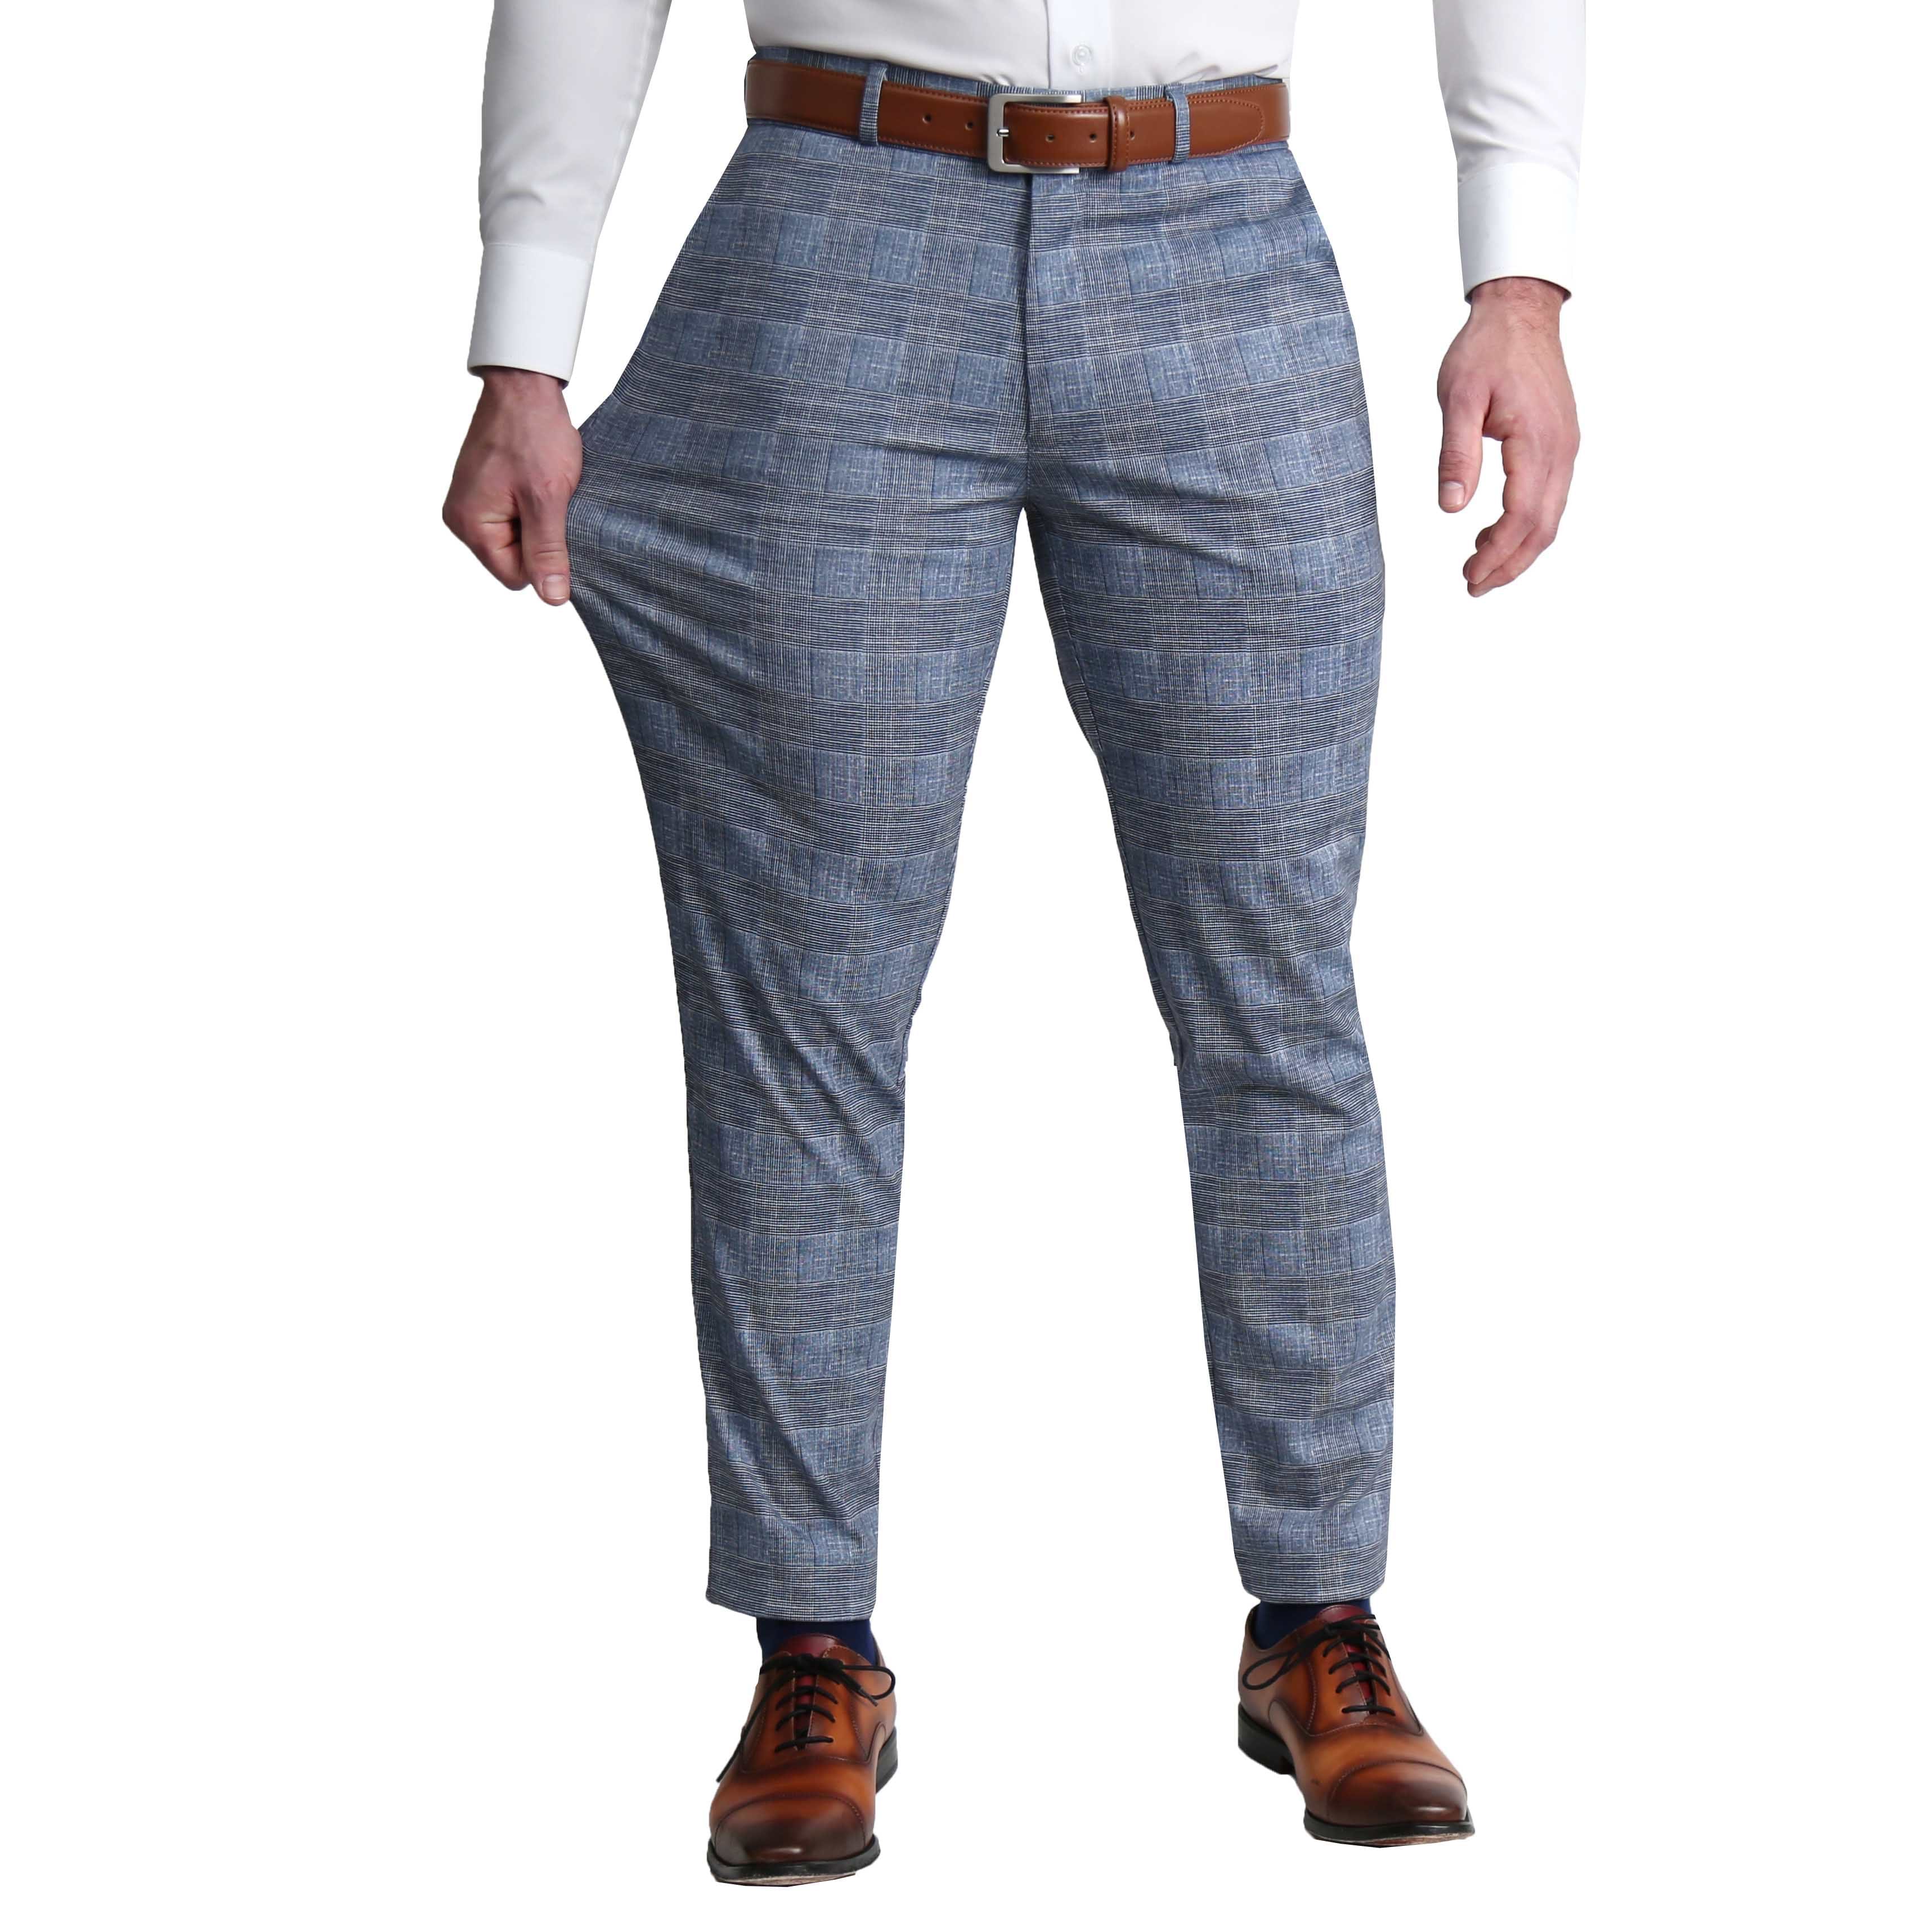 Athletic Fit Stretch Suit Pants - Knit Light Blue, Navy and White Plaid